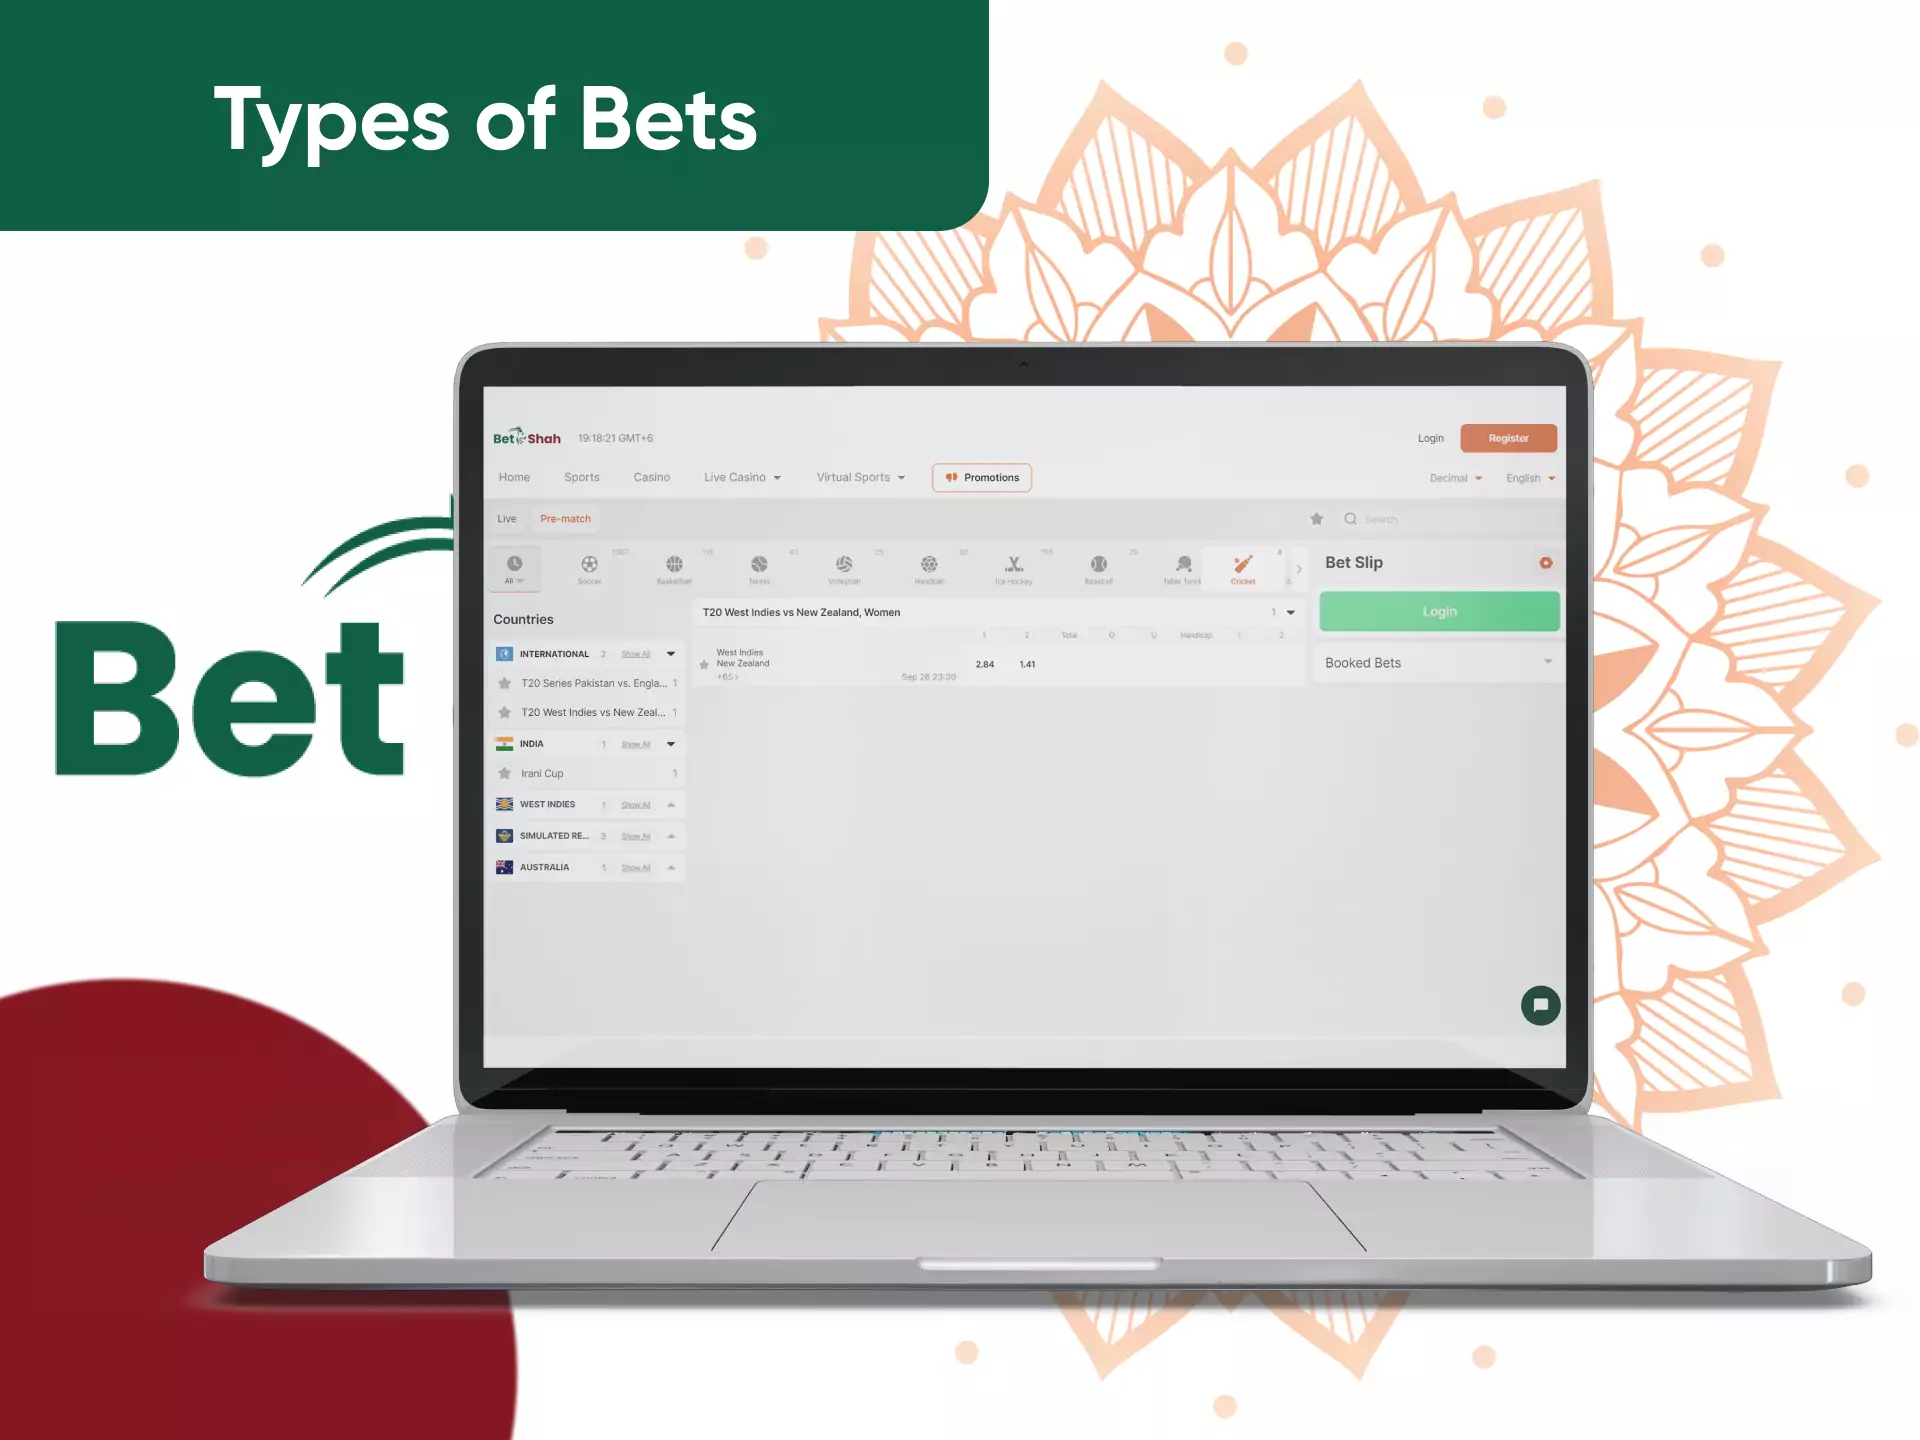 There are many types of bets you can place on Betshah.